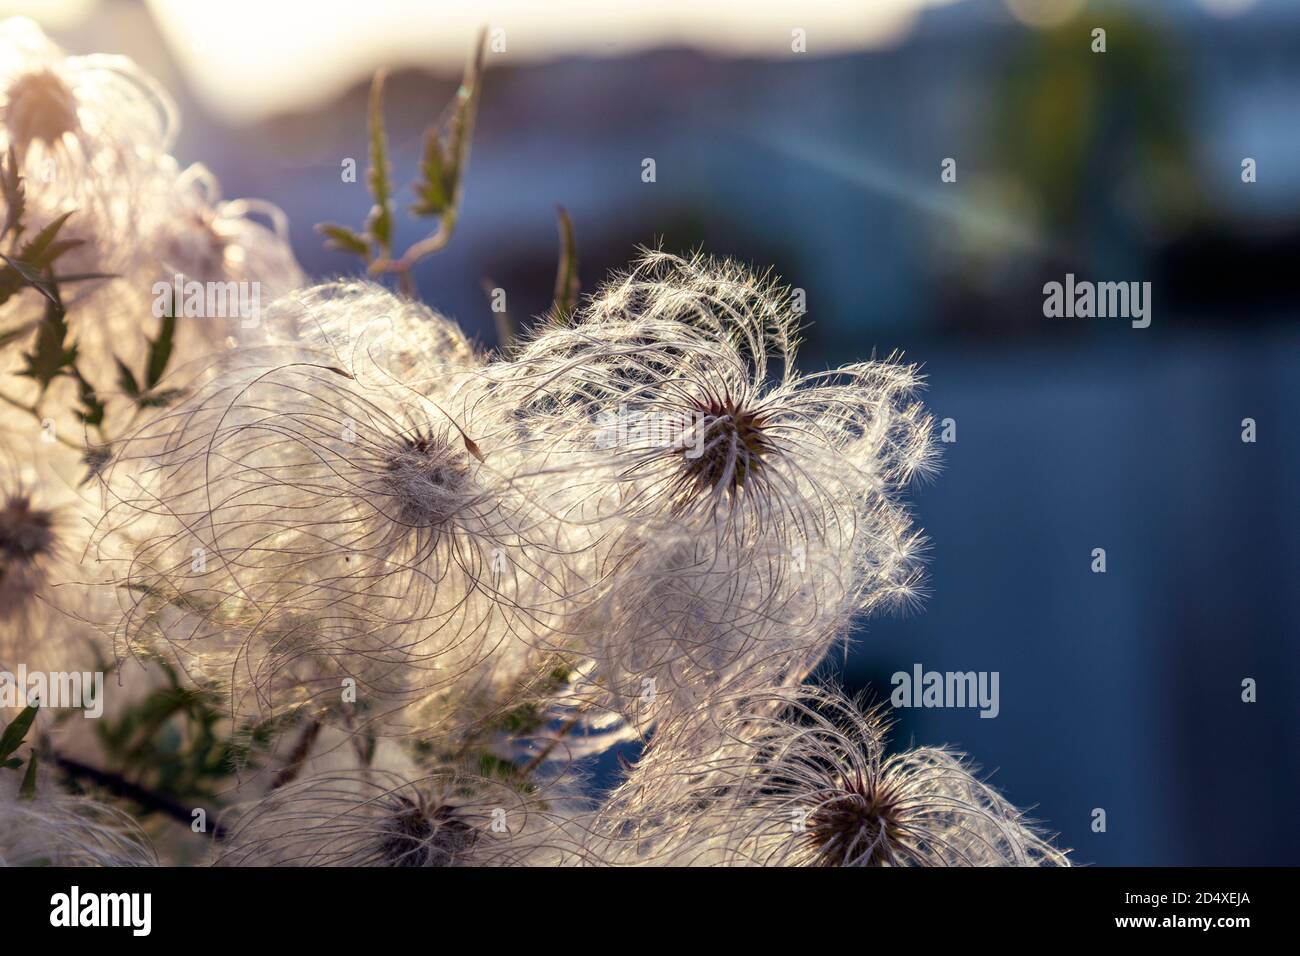 Fluffy clematis seed heads against the sun (Rooftop of Warsaw University Library Roof Garden, Warsaw Poland) Stock Photo